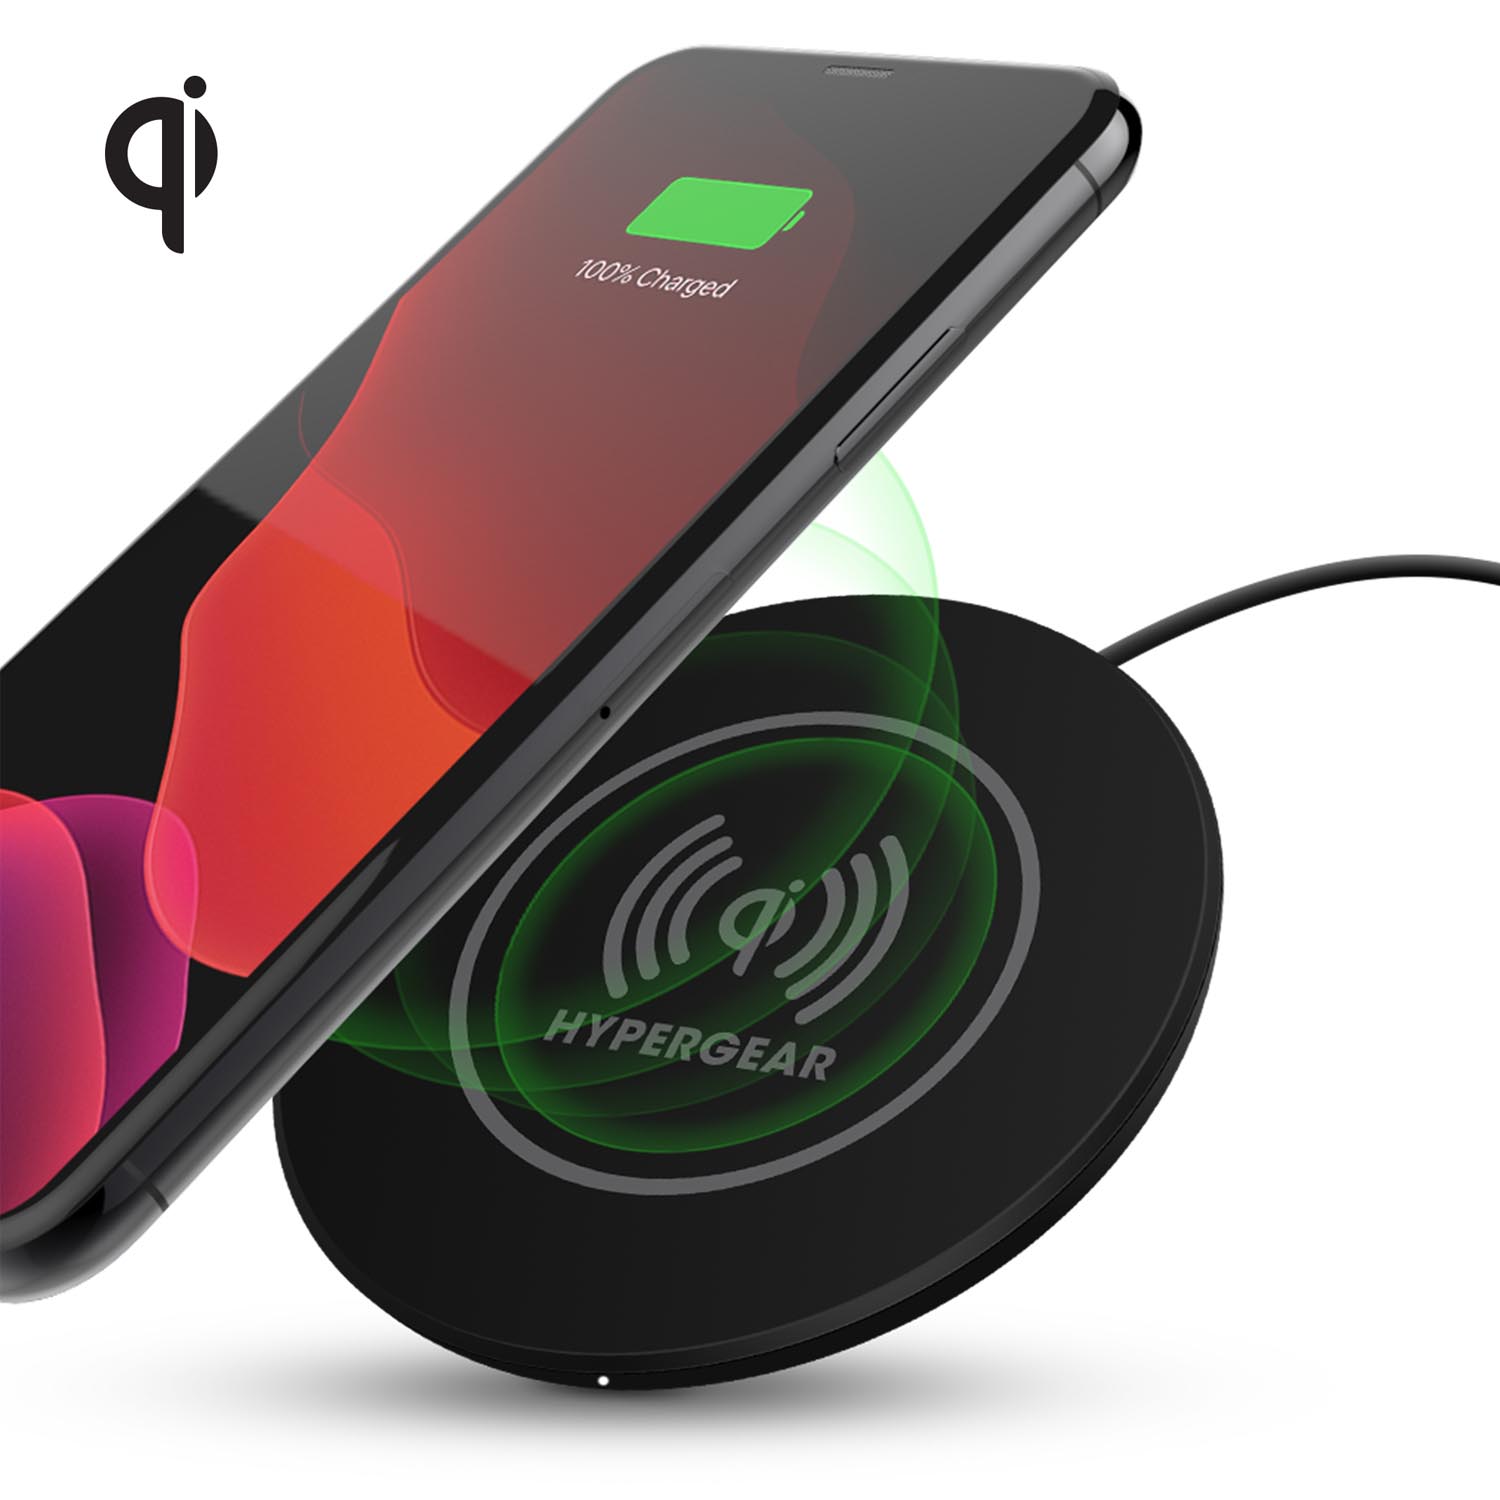 HyperGear Wireless Charge Pad